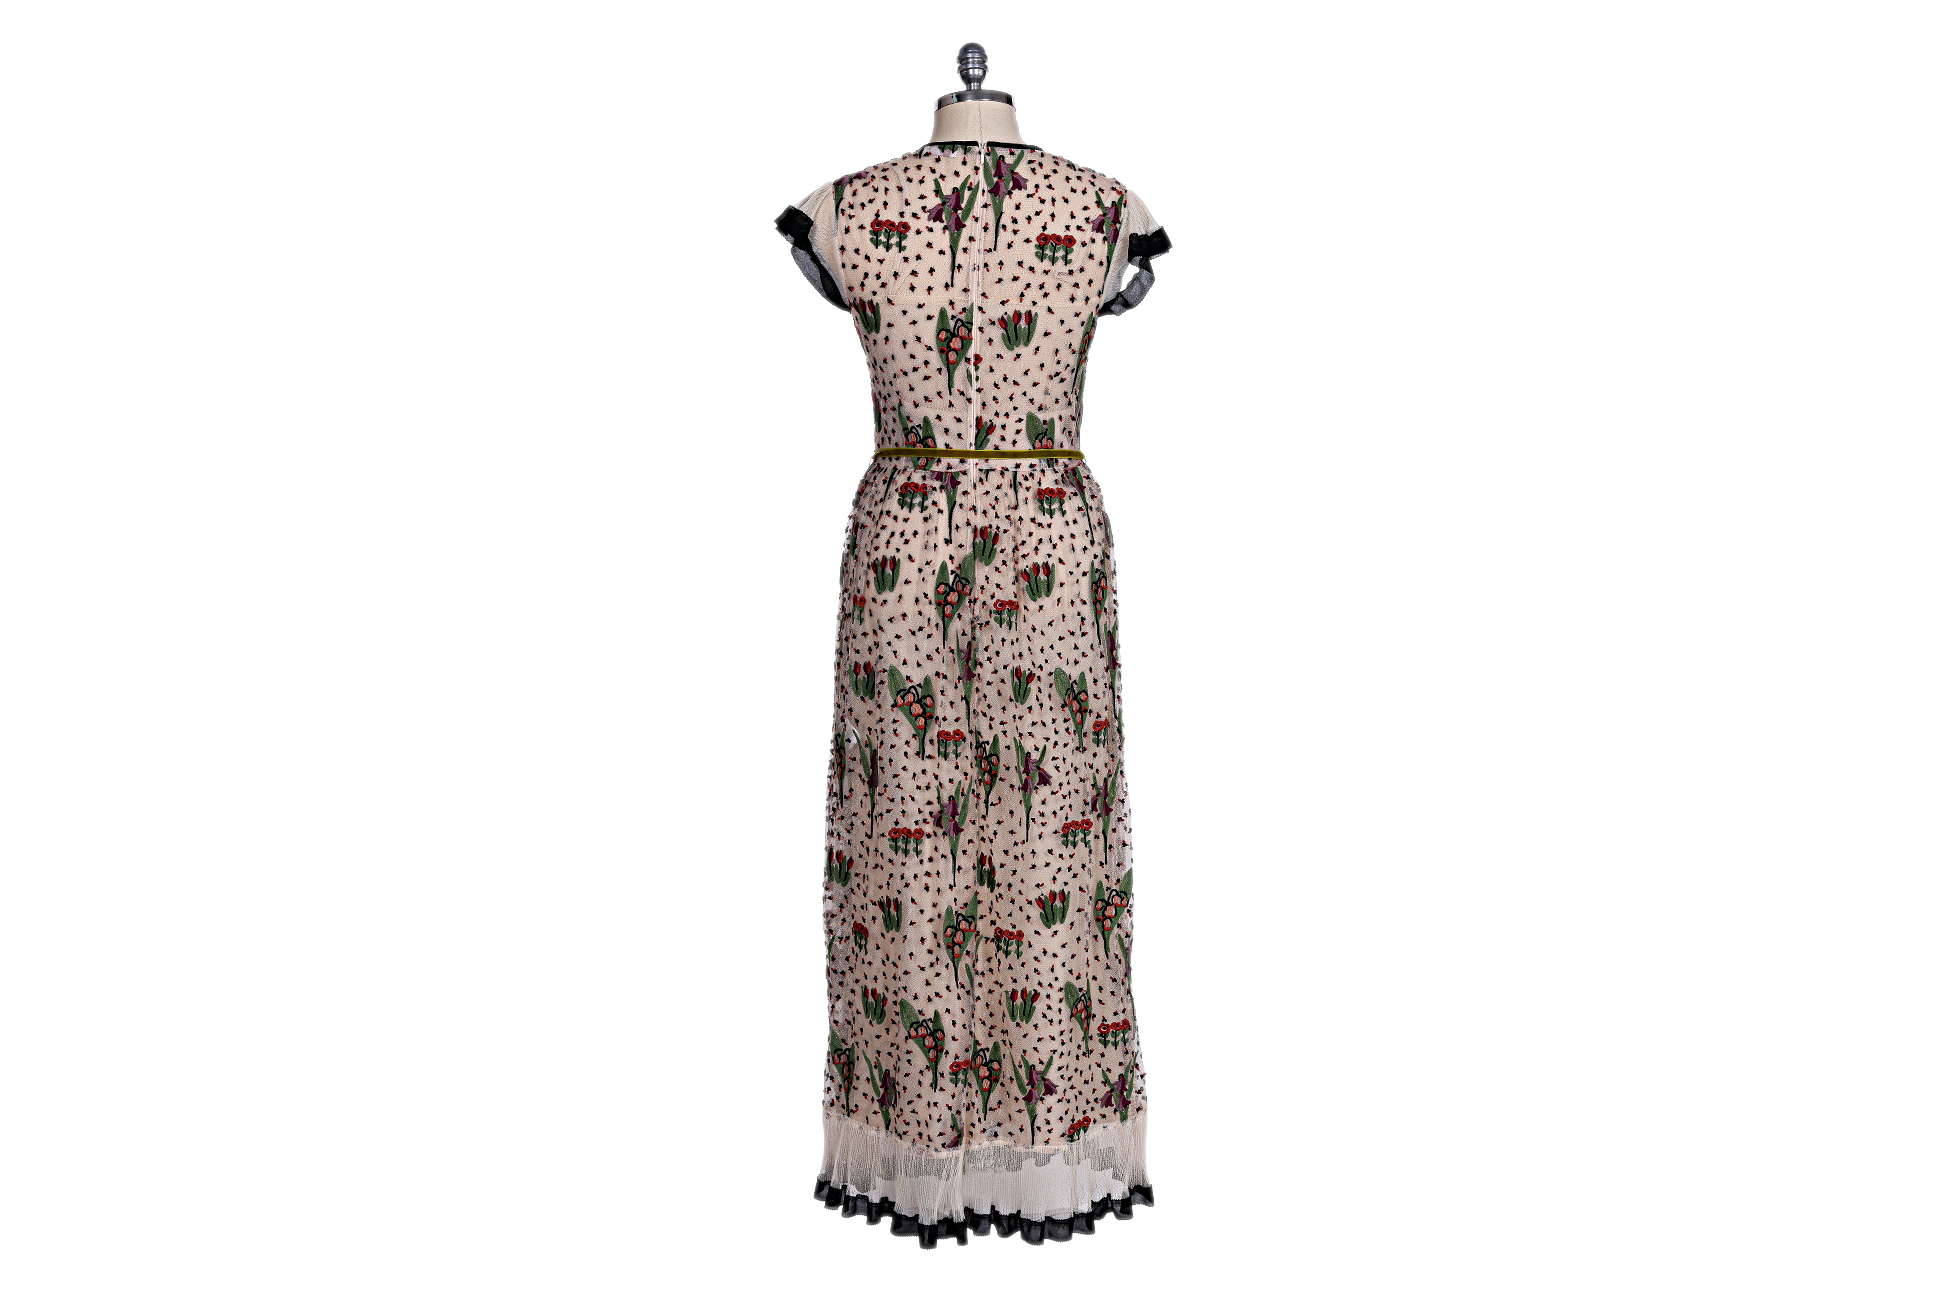 A RED VALENTINO GARDEN EMBROIDERED DRESS - Image 2 of 5